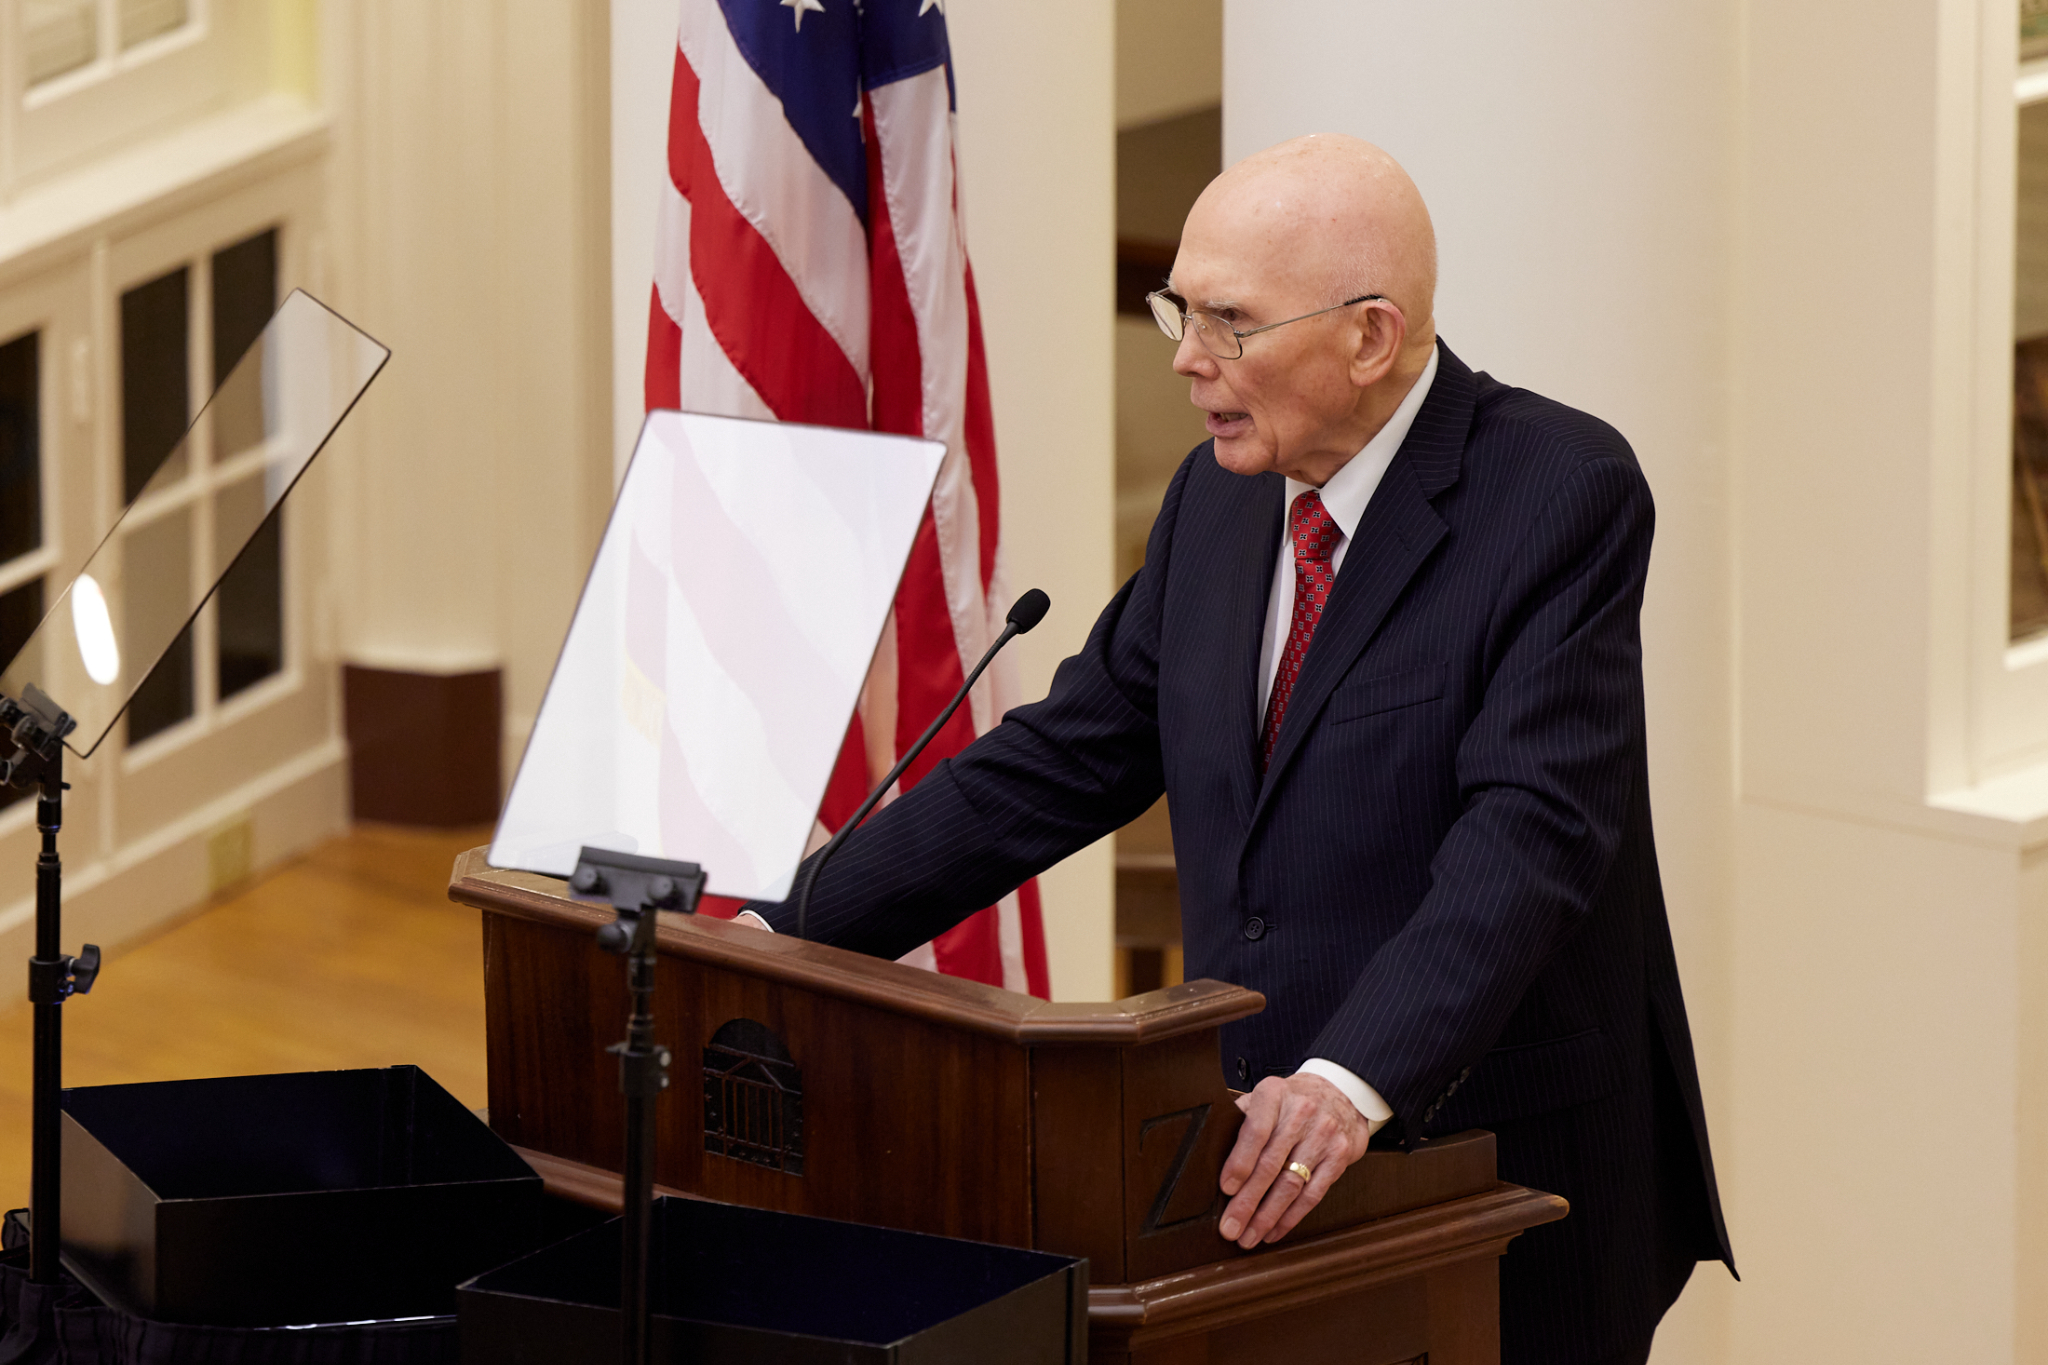 President Dallin H. Oaks of the First Presidency delivers the 2021 Joseph Smith Lecture in the Dome Room of the Rotunda at the University of Virginia on Nov. 12, 2021. Photo © 2021 by Intellectual Reserve Inc. All rights reserved.